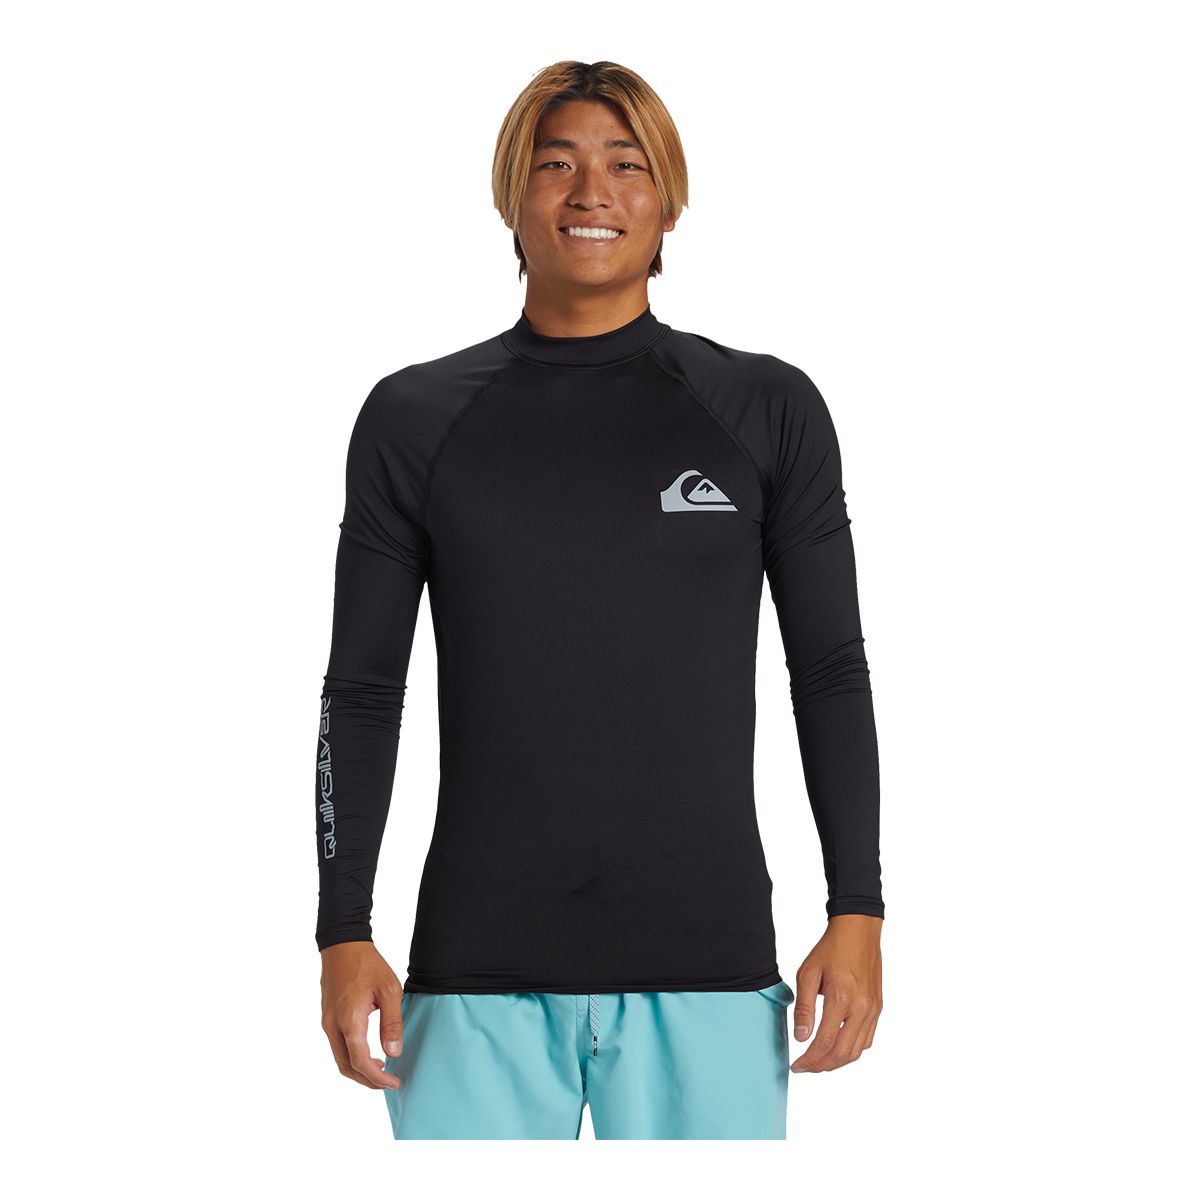 Image of Quiksilver Men's Everyday UPF 50 Long Sleeve T Shirt